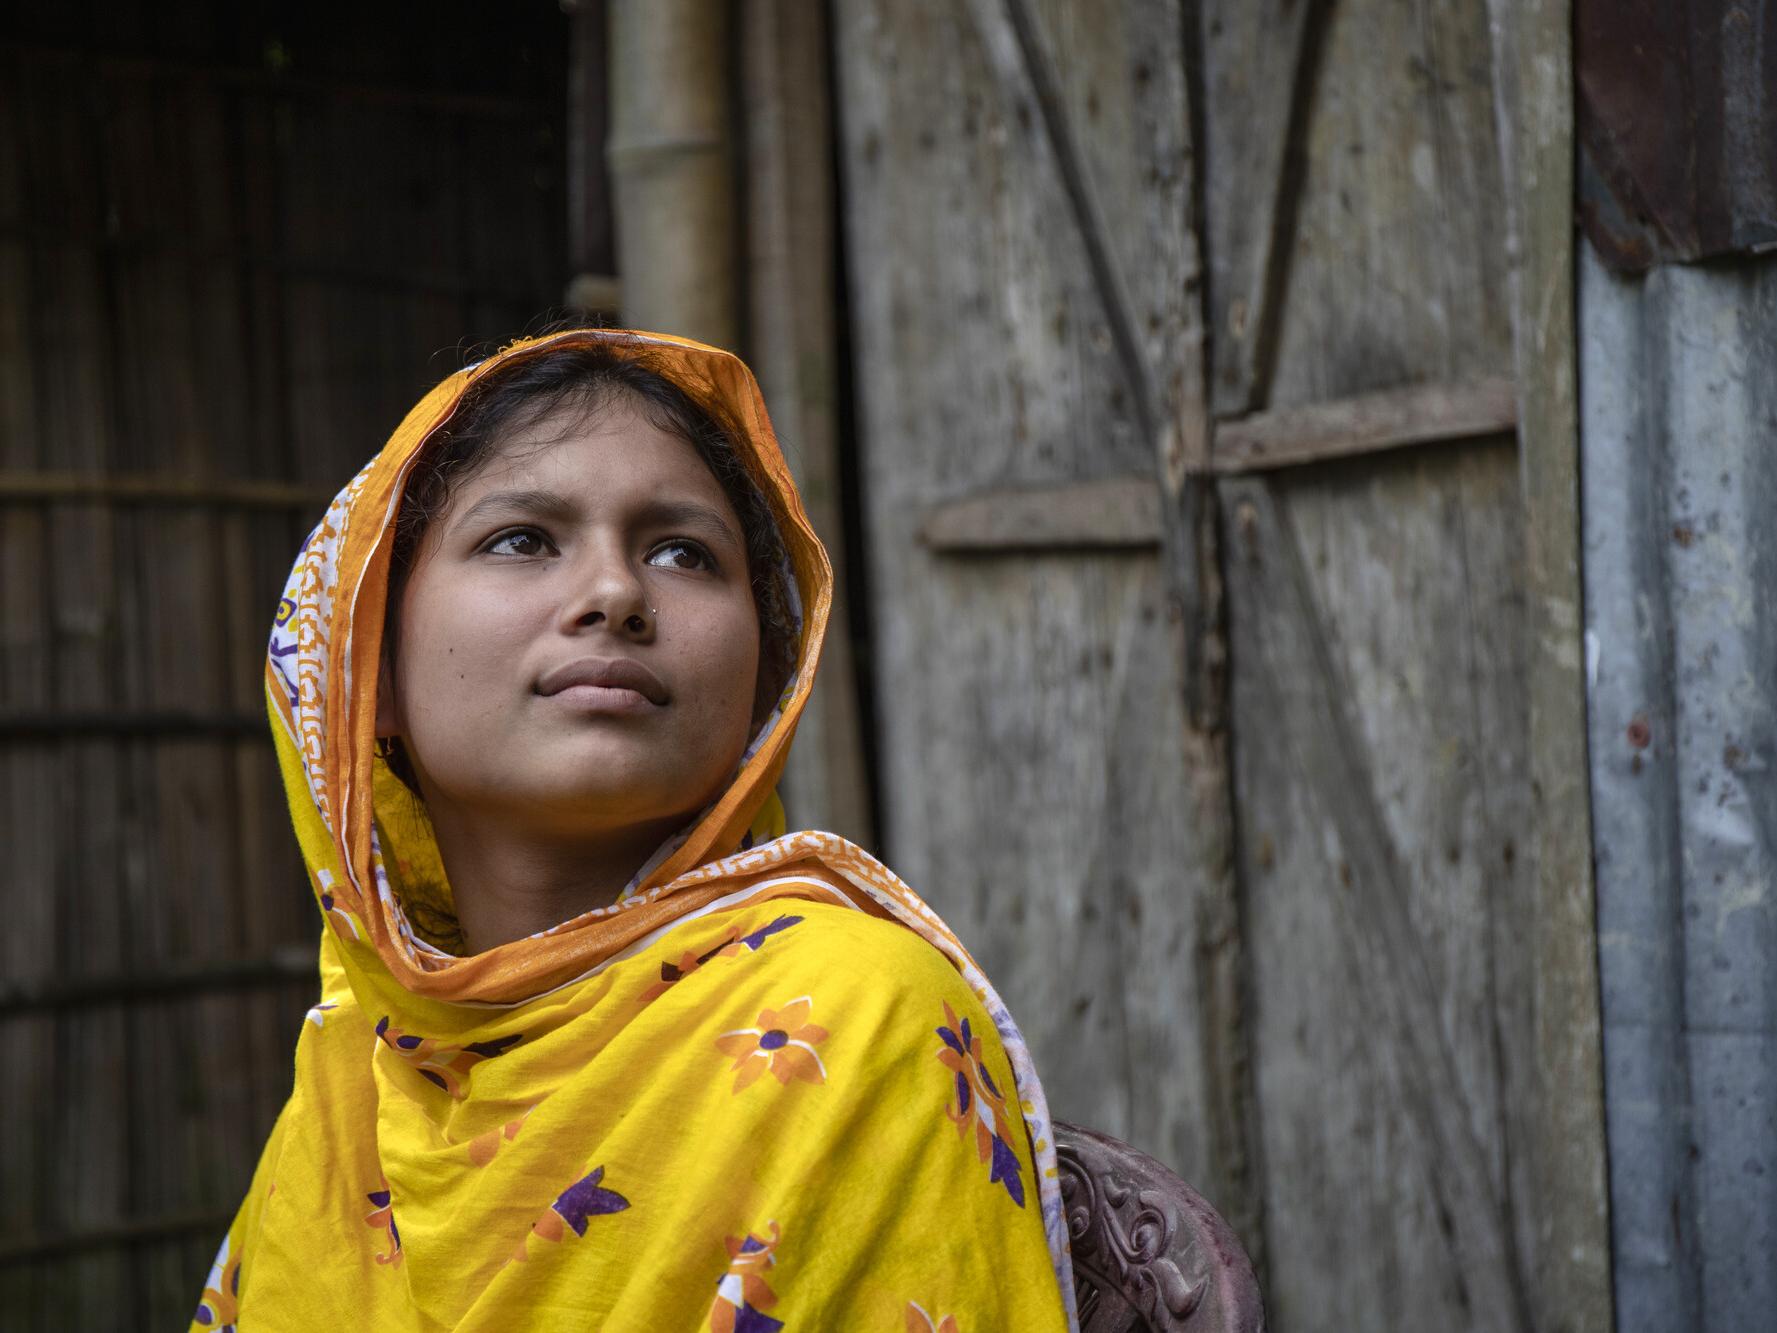 Monalisa, 15, looking into the distance in Bangladesh